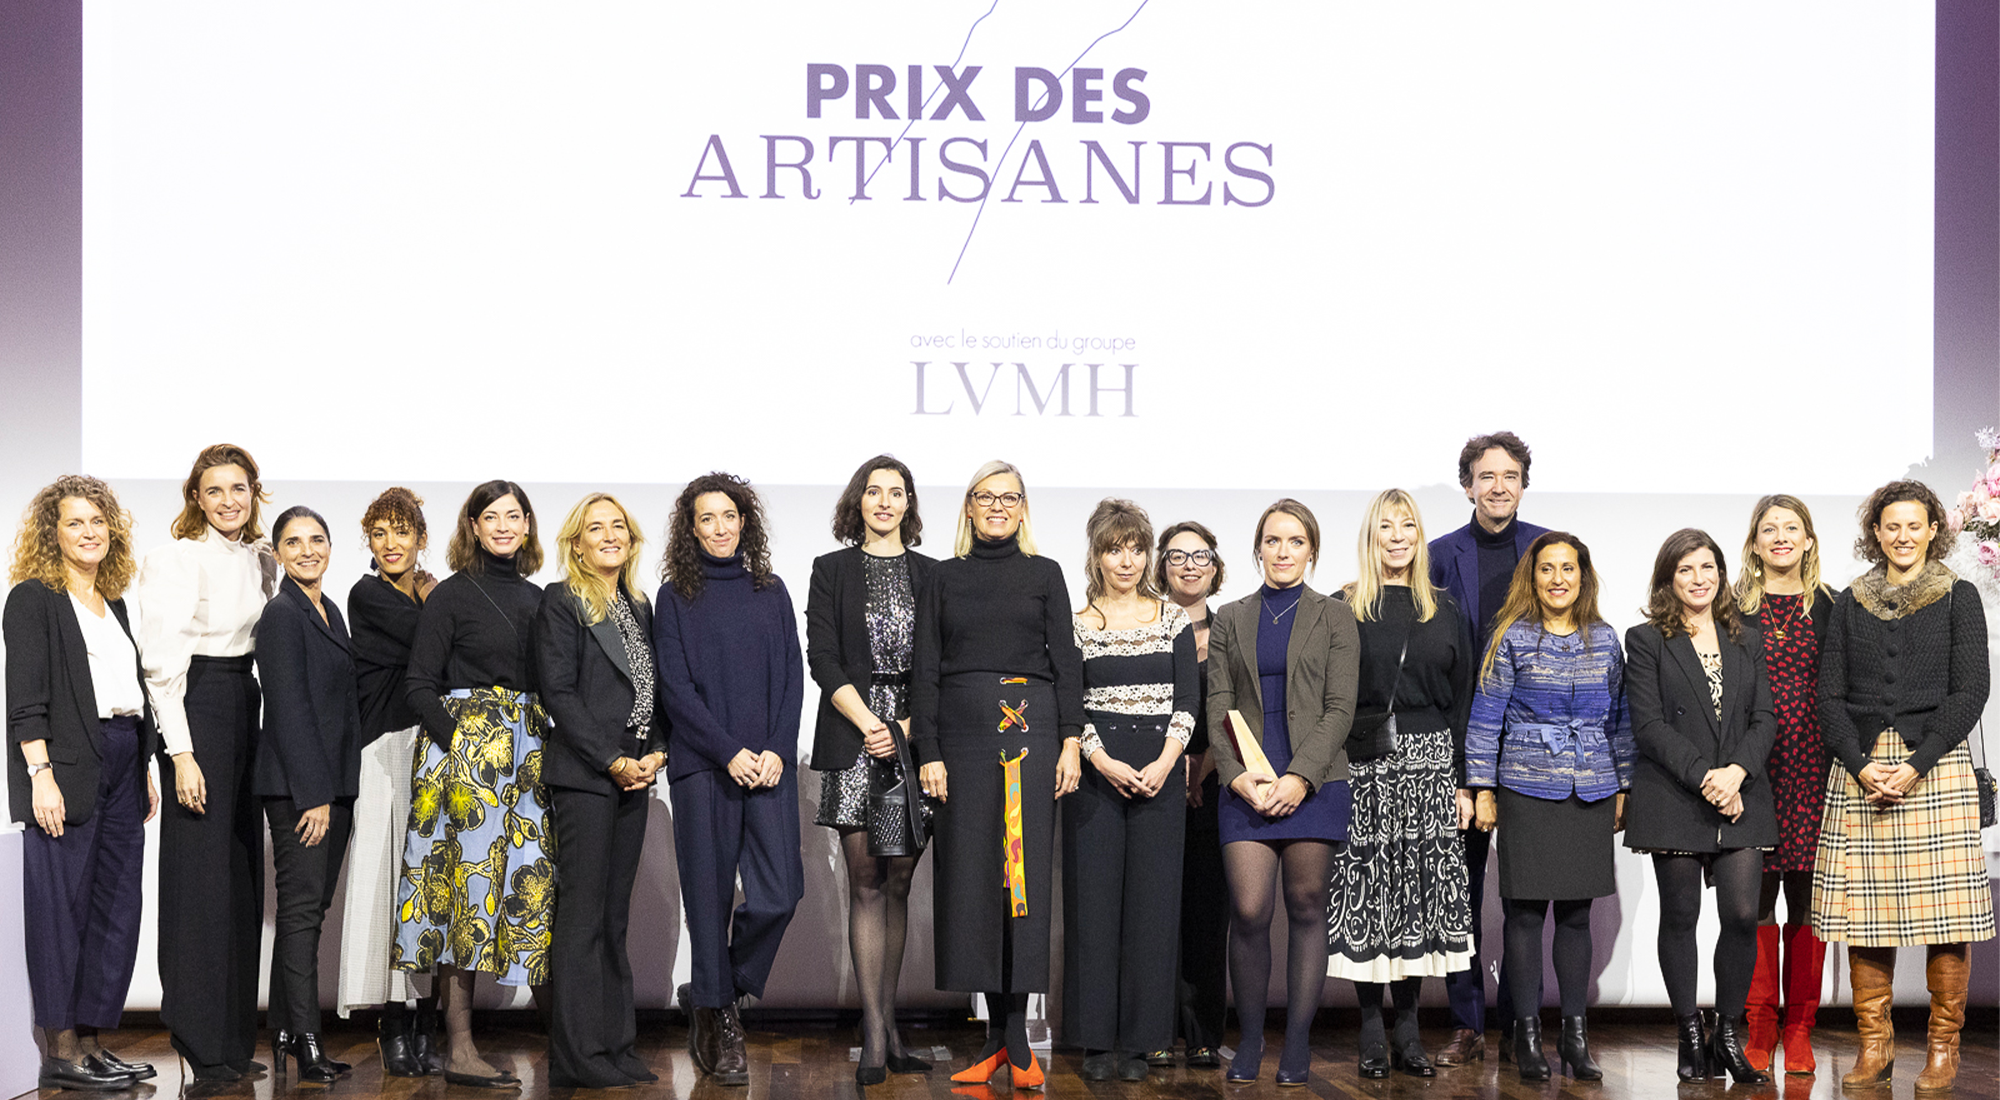 ELLE and LVMH announce the four winners of Prix des Artisanes 2nd